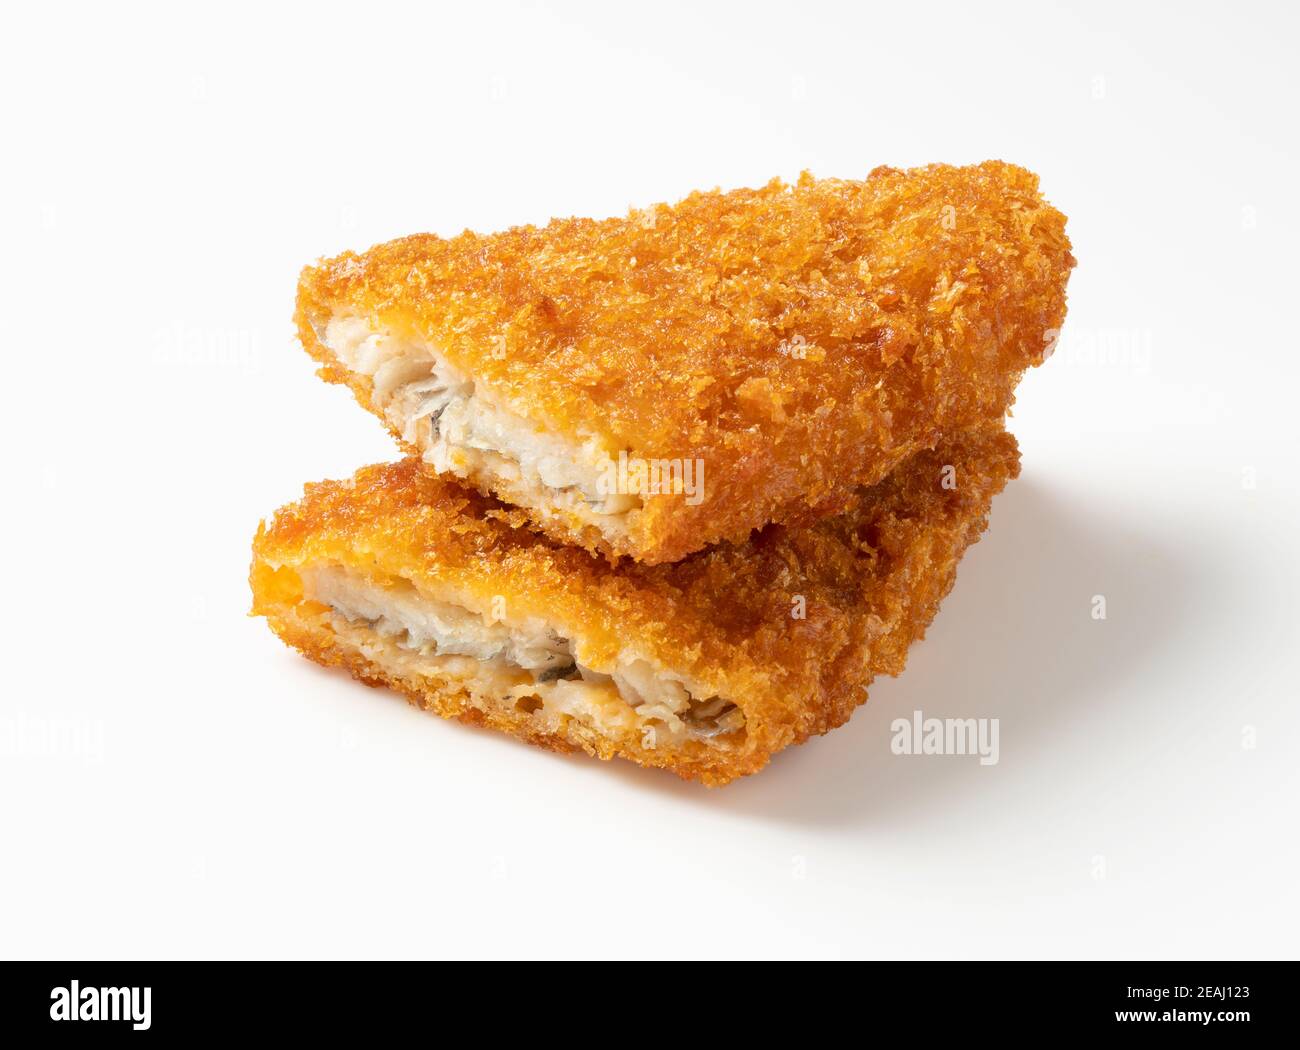 Fried fish on a white background Stock Photo